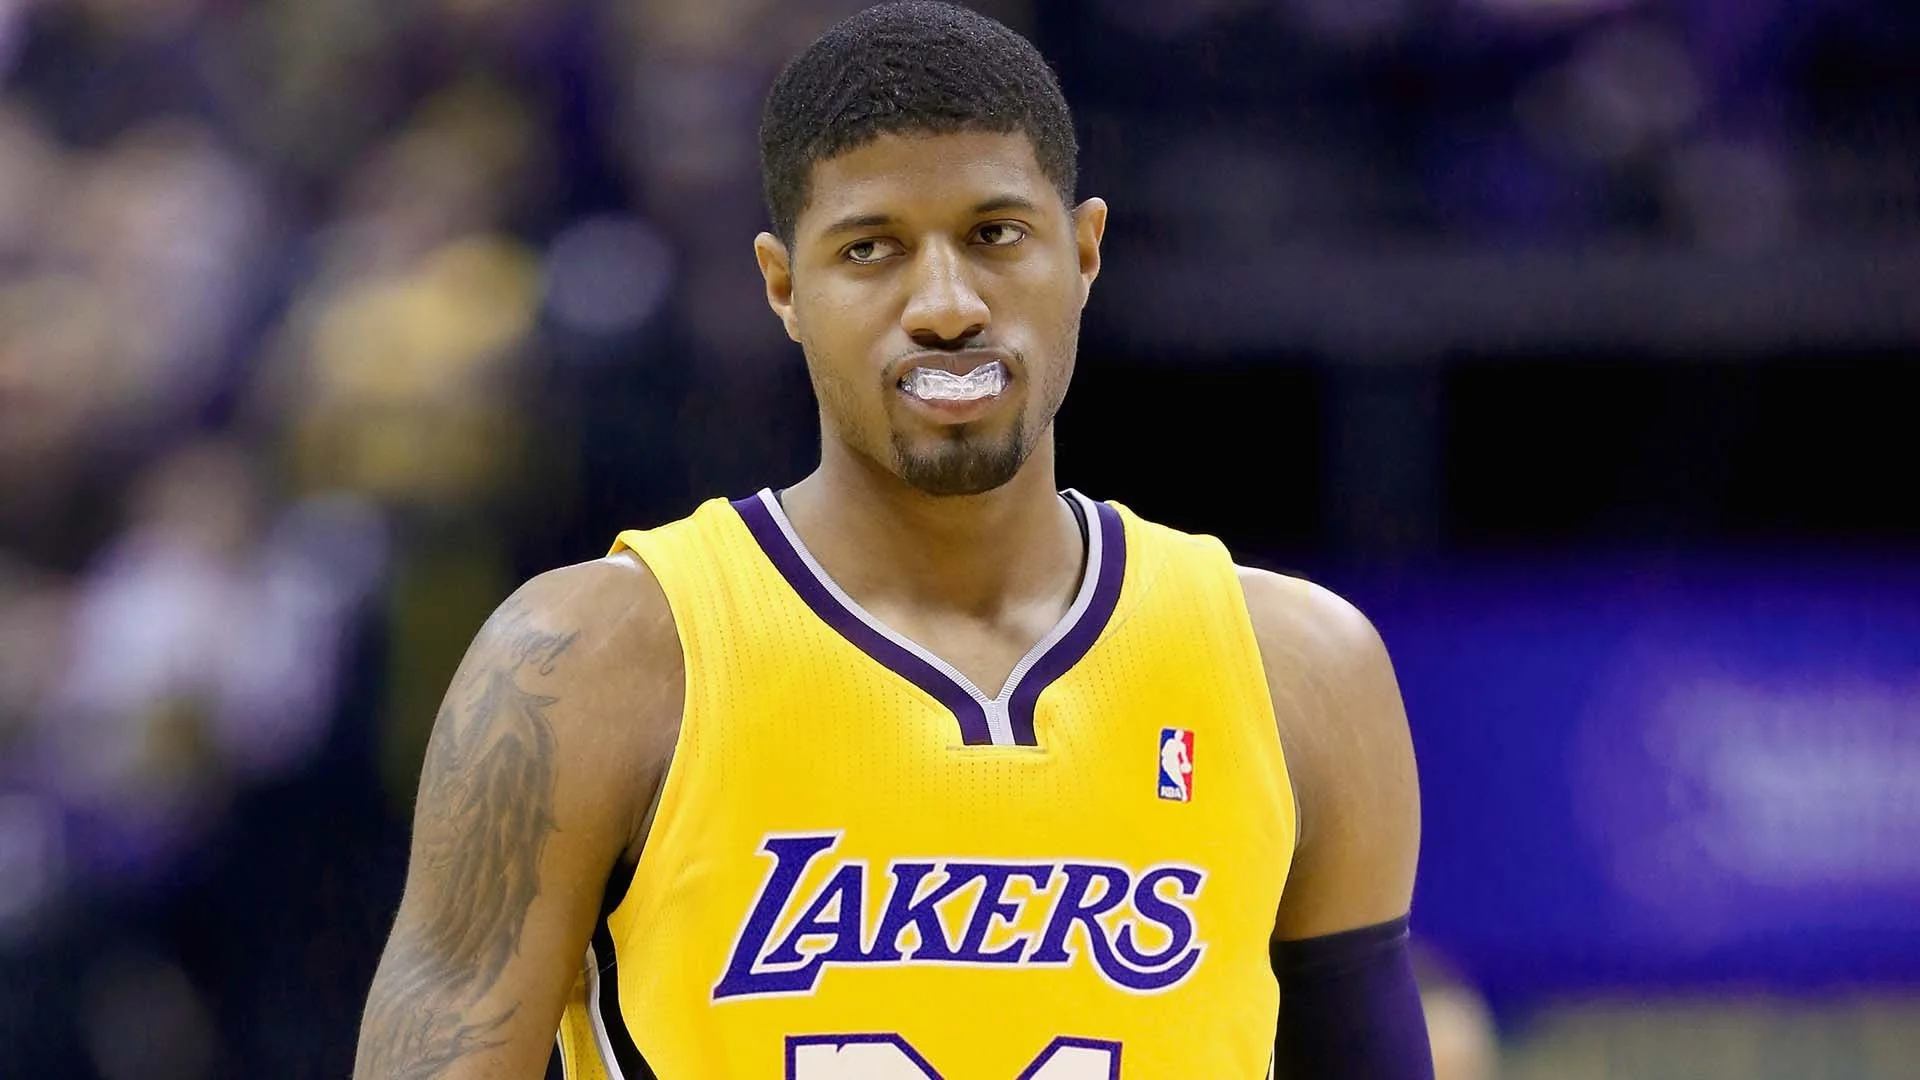 Paul download. Paul George. Paul George Clippers. La Clippers Paul George. Пол Джордж 2.